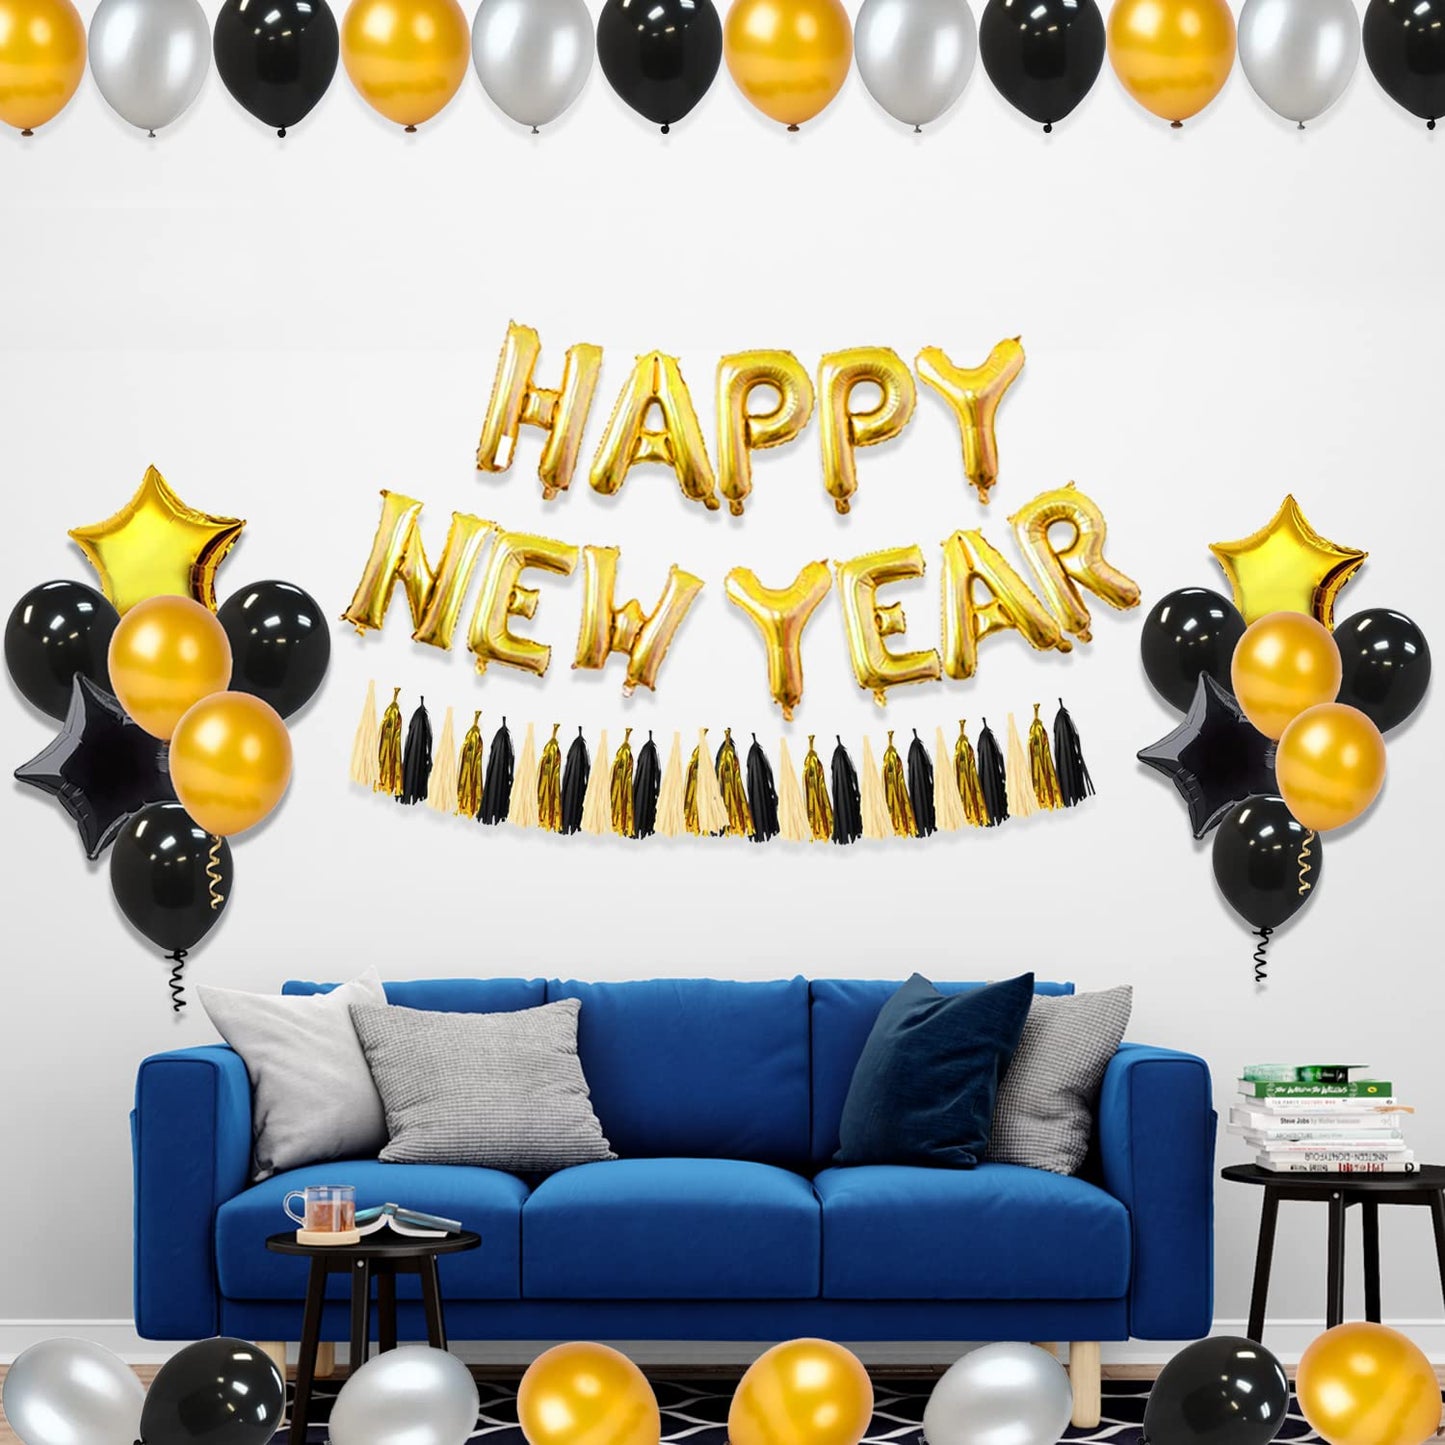 Black & Golden Happy New Year Decoration - Pack of 43 Pcs - New Year Foil, Star Shape Foil, Tassle, Metallic & Latex Balloons For House Party - CherishX Partystore